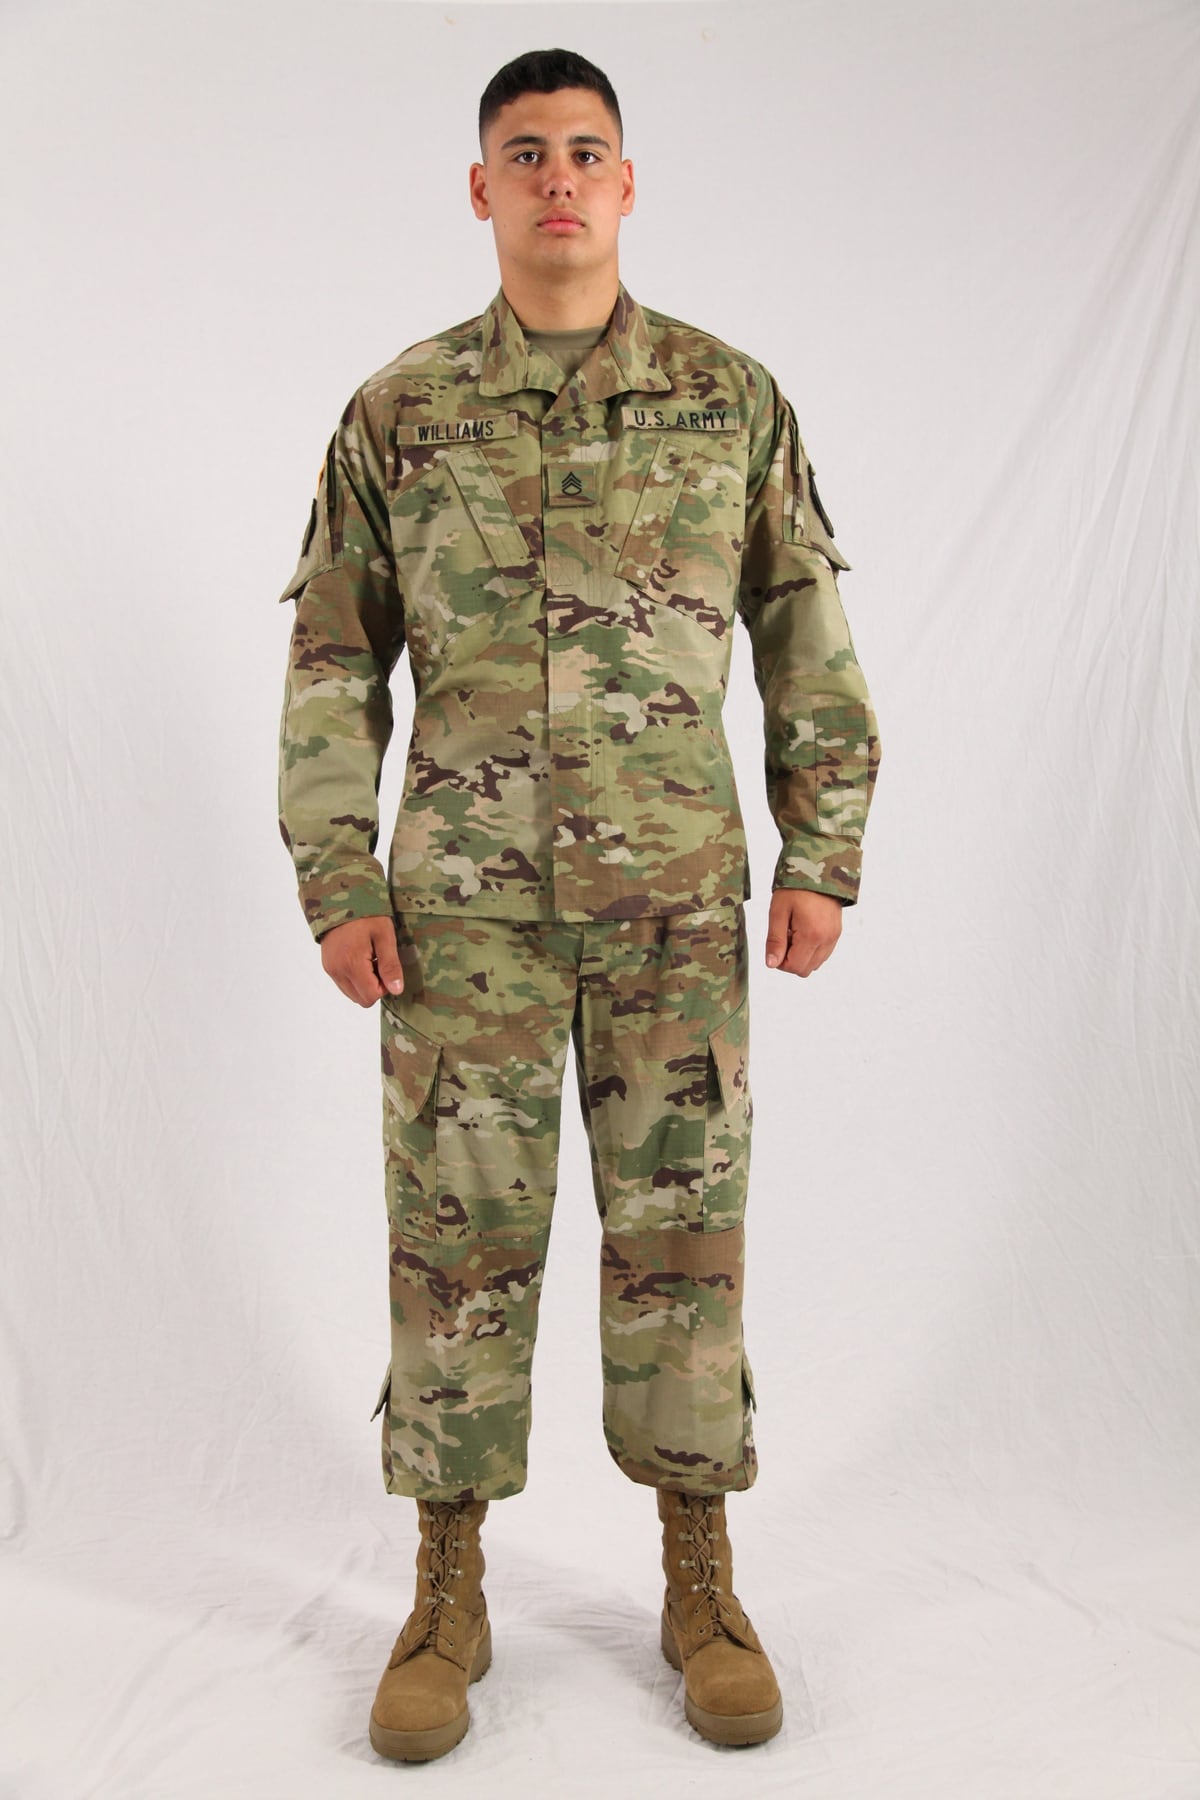 Camo update: New ACUs hit store shelves July 1